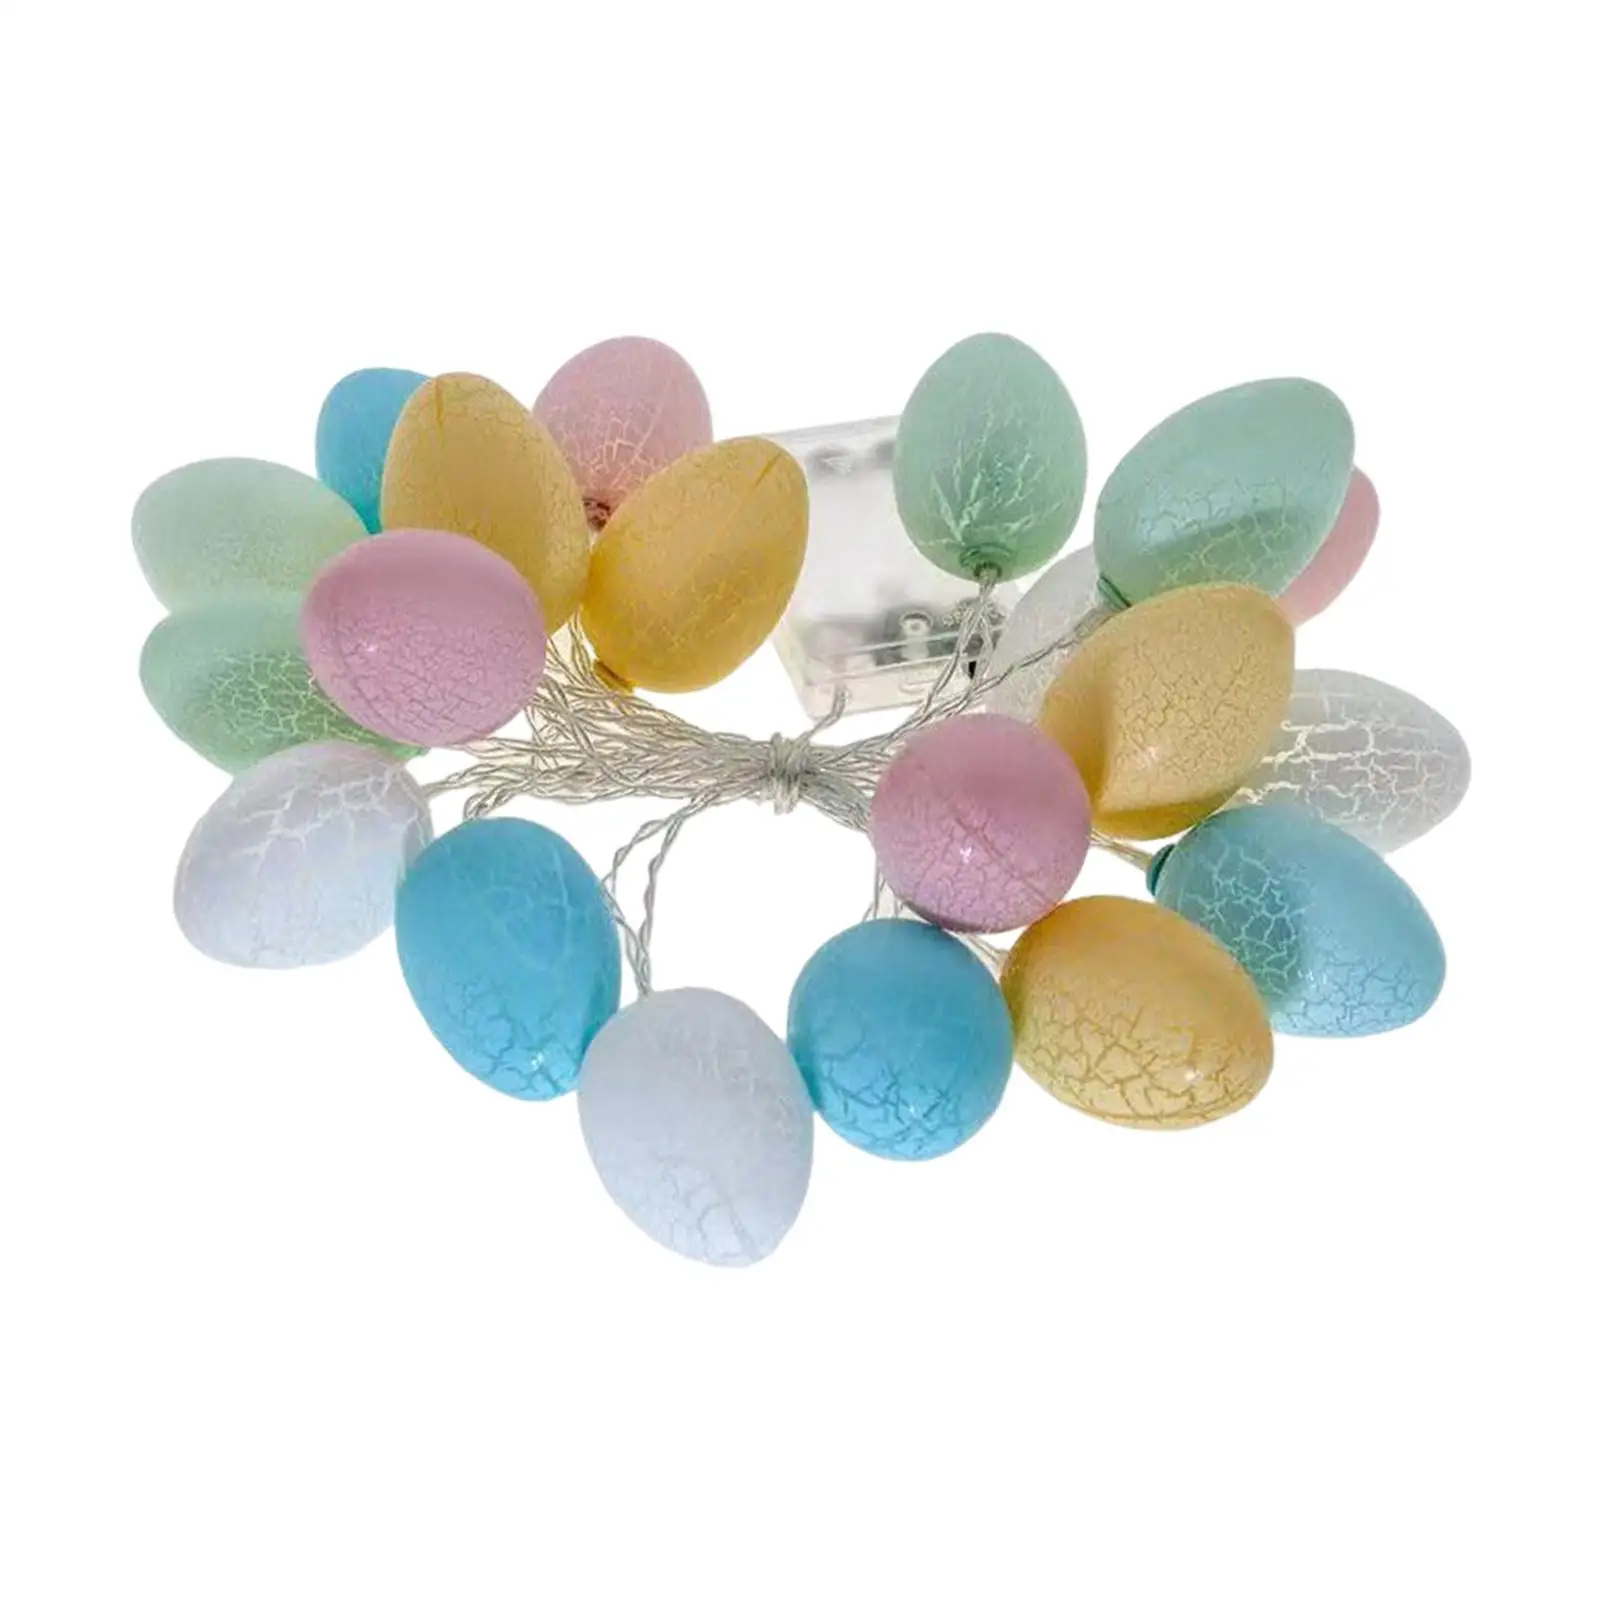 Colorful Easter Eggs Fairy Lights Decor Retro Style Supplies String Lights for Living Room Garden Halloween Outdoor Party